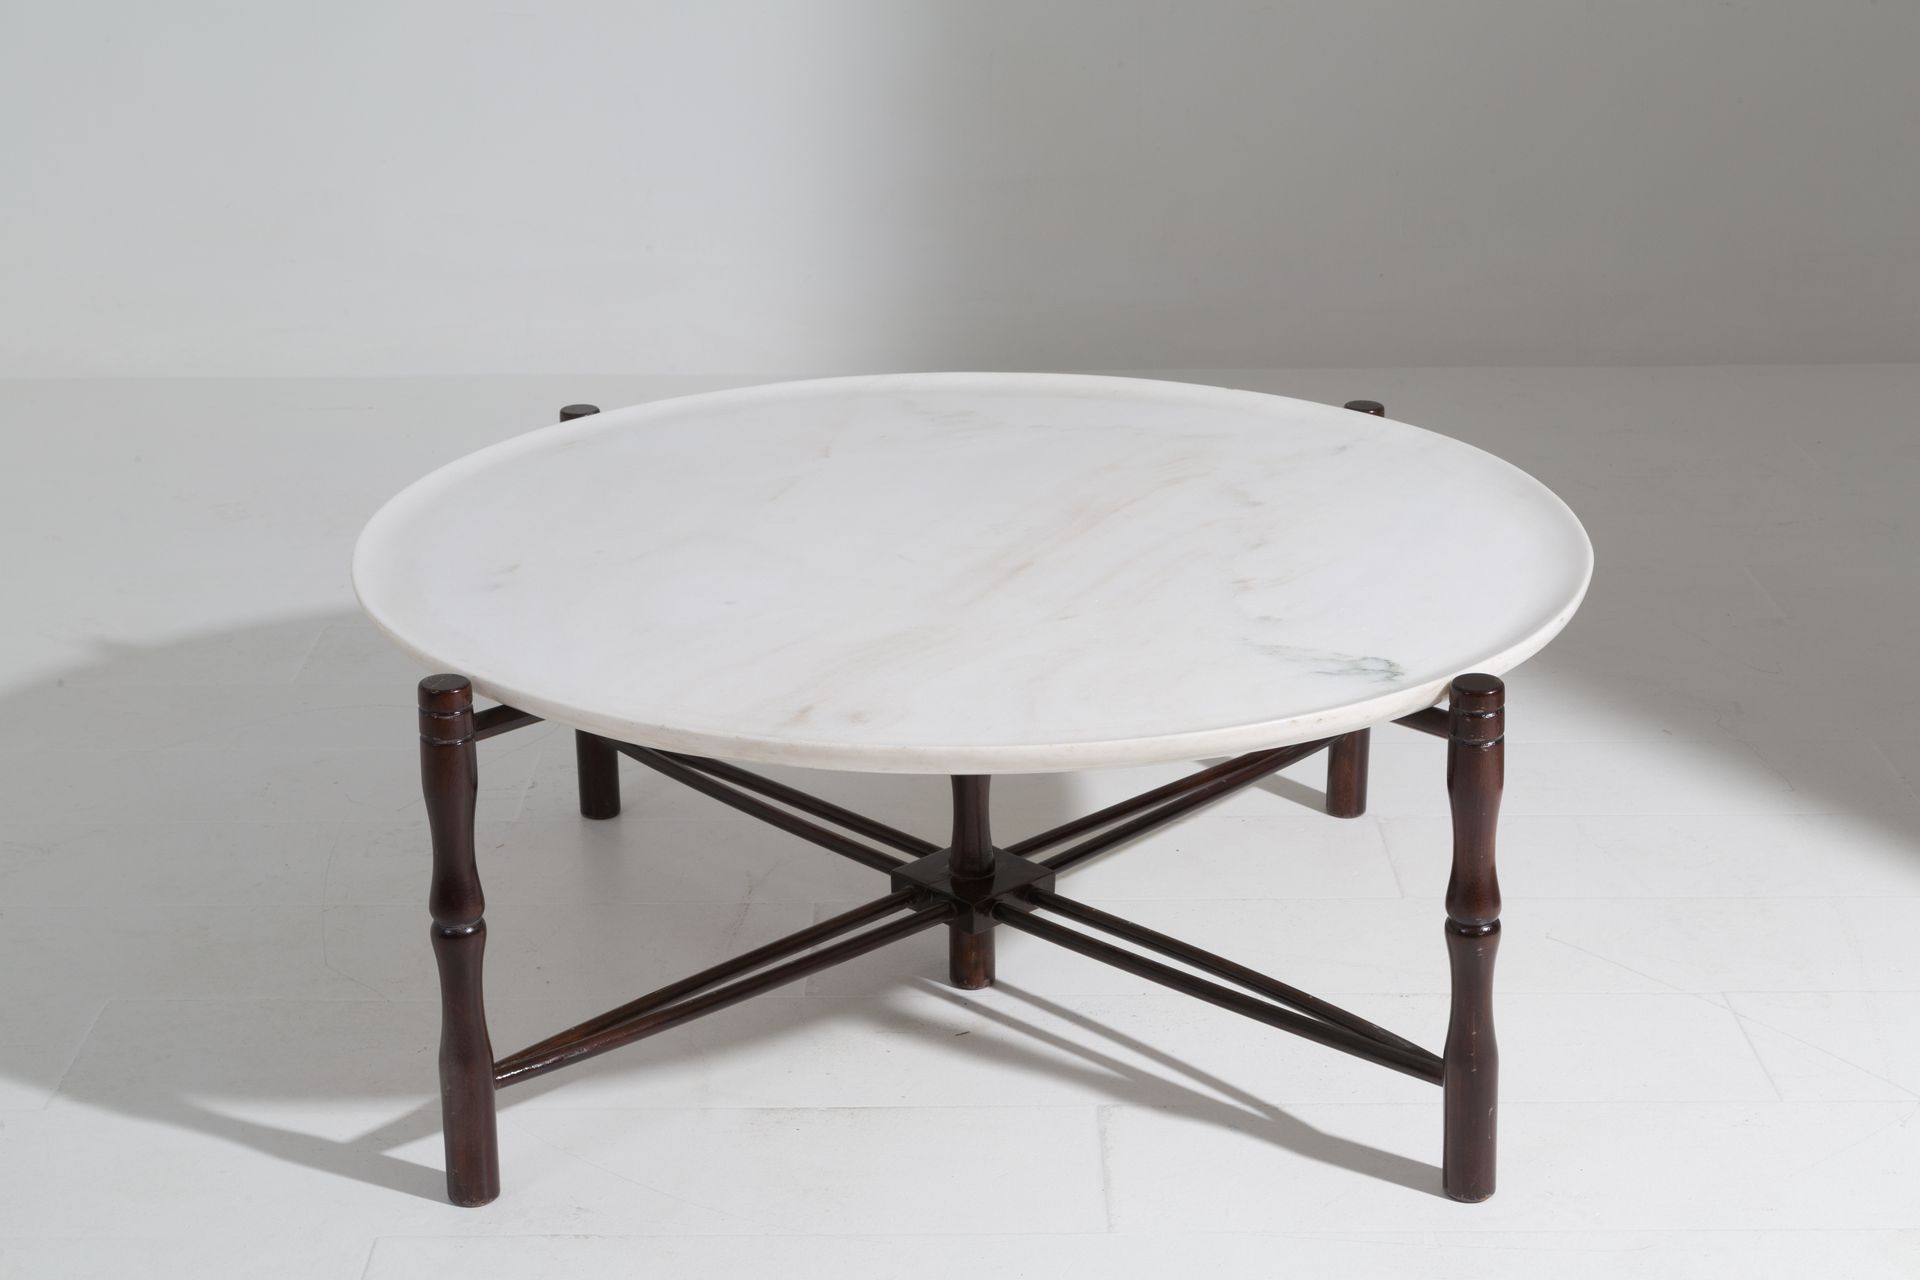 GIUSEPPE SCAPINELLI. Wooden and marble table. 50s GIUSEPPE SCAPINELLI (Modène, 1&hellip;